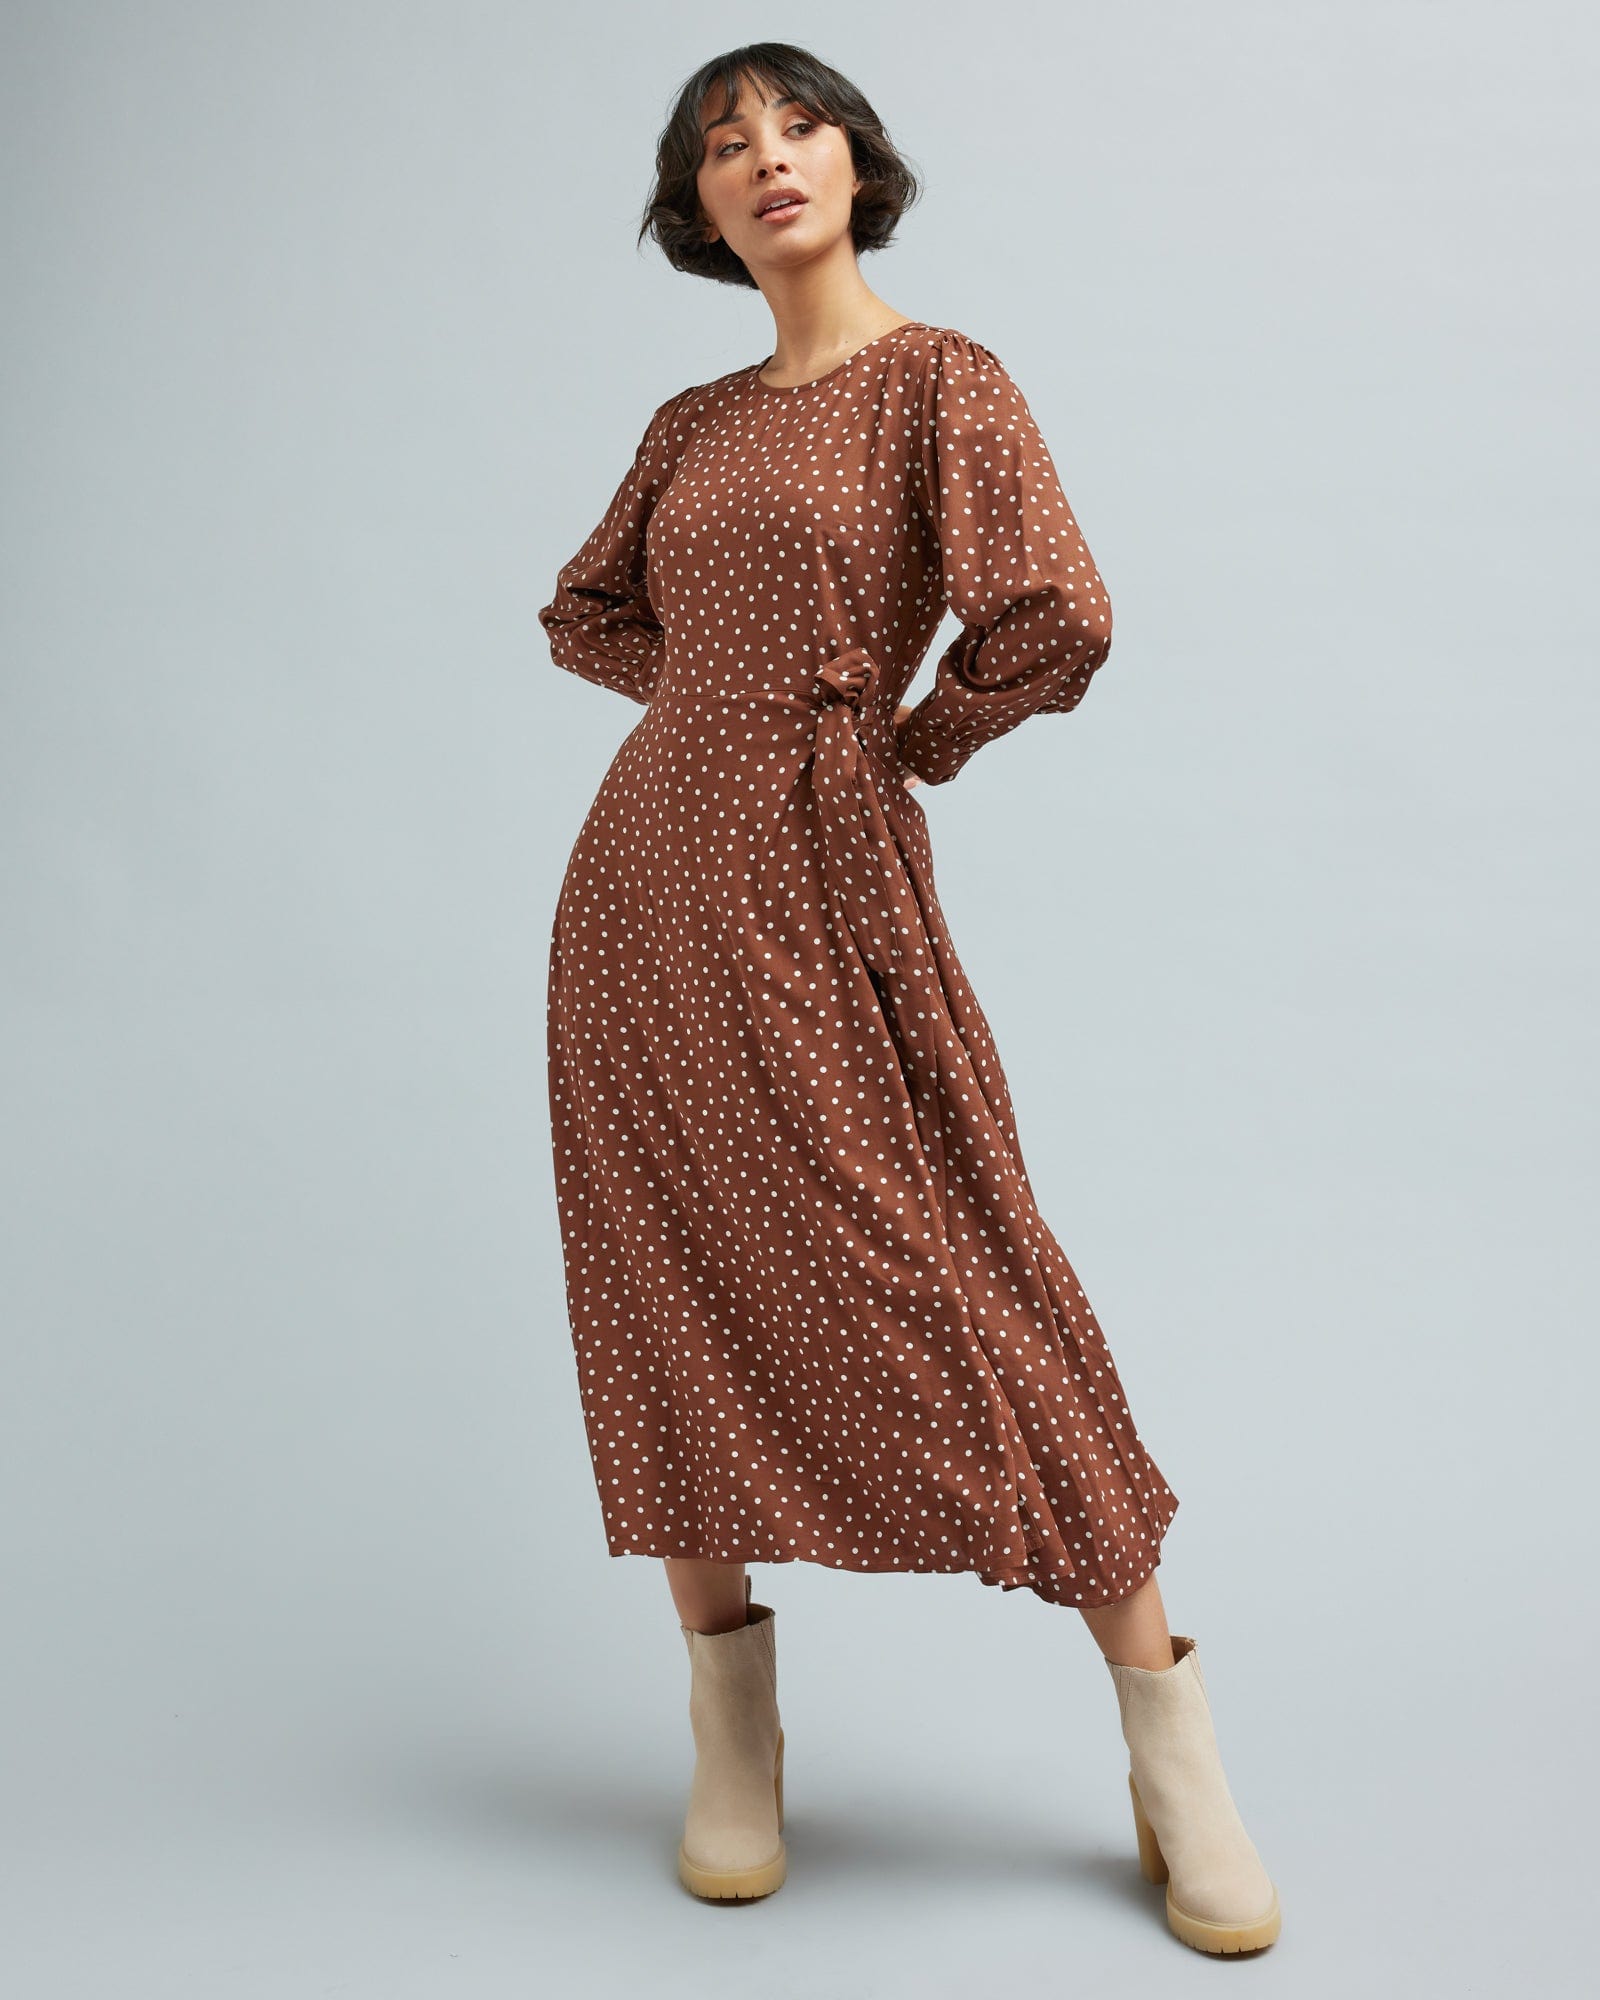 Woman in a brown with white polka dot, long sleeve dress